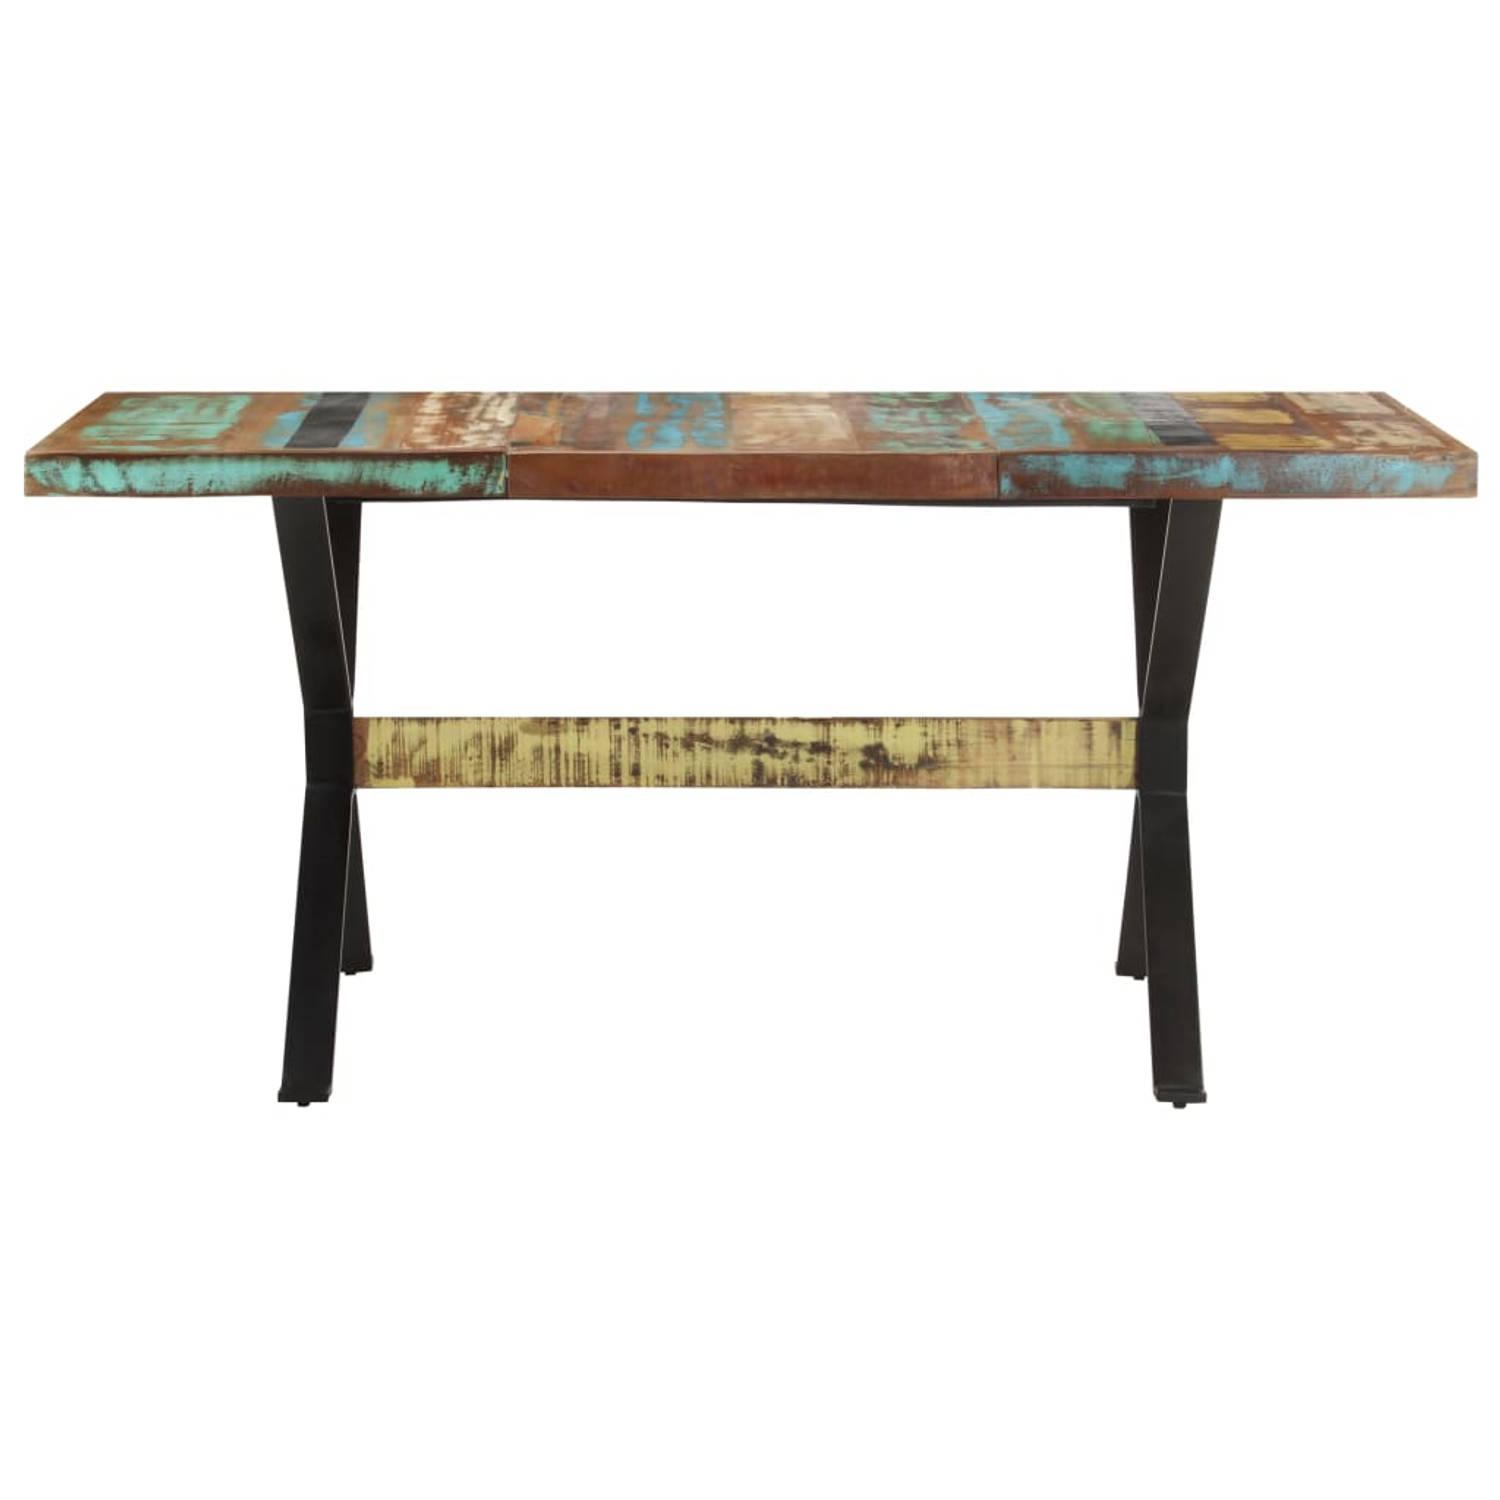 The Living Store Eettafel 160x80x76 cm massief gerecycled hout - Tafel